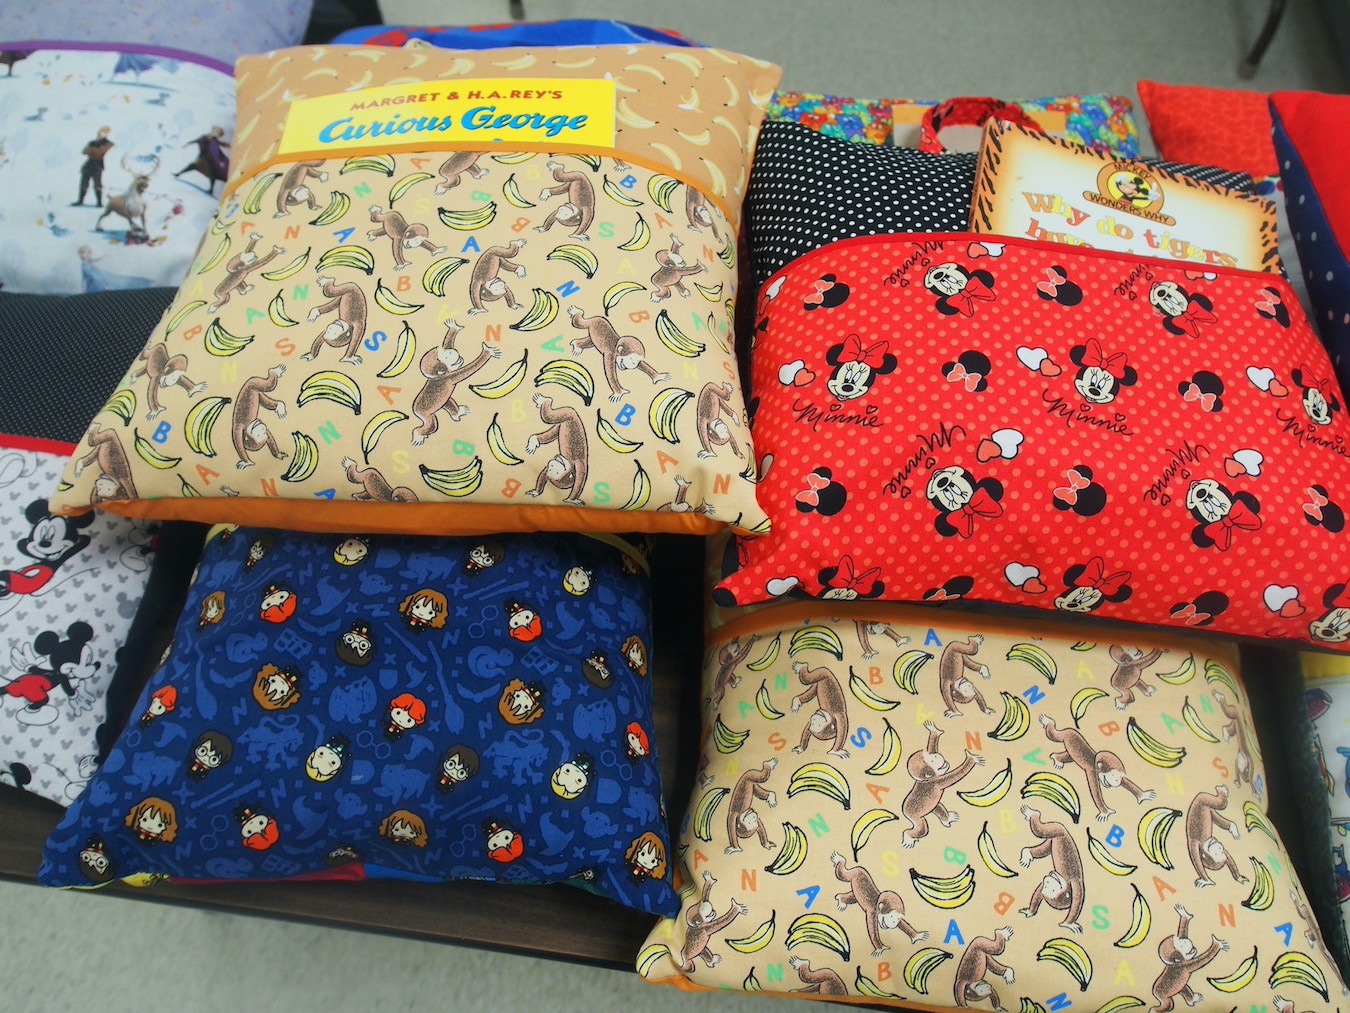 Some of the book pillows that will be given away at the April raffle at the Grand Island Memorial Library, which has children excited about reading as the goal.